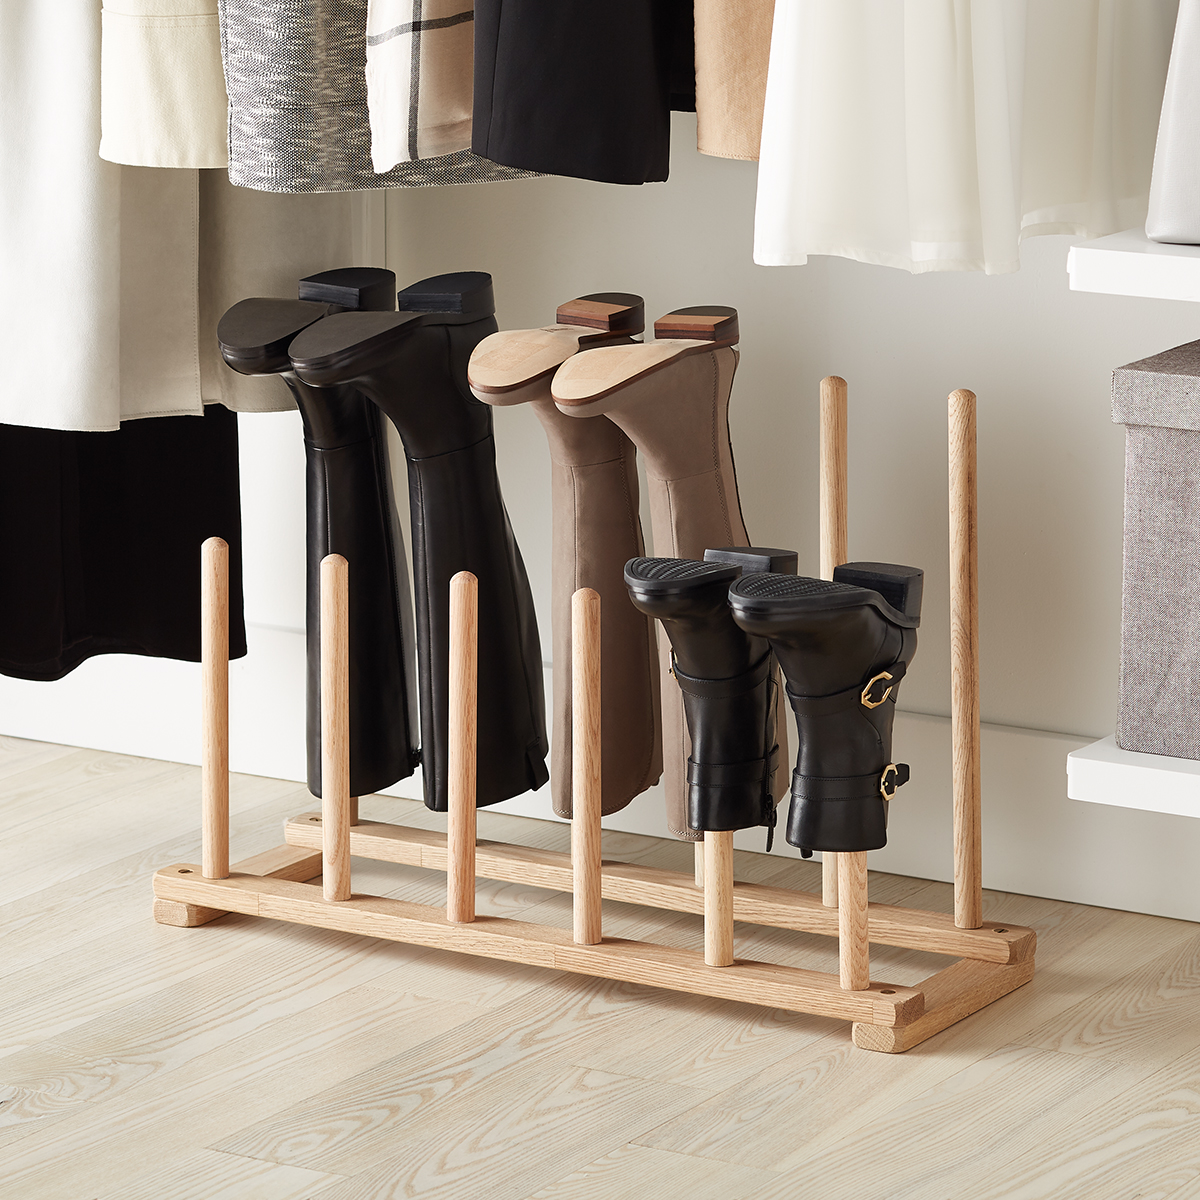 https://www.containerstore.com/catalogimages/460684/10080436-6-pair-boot-rack-natural.jpeg